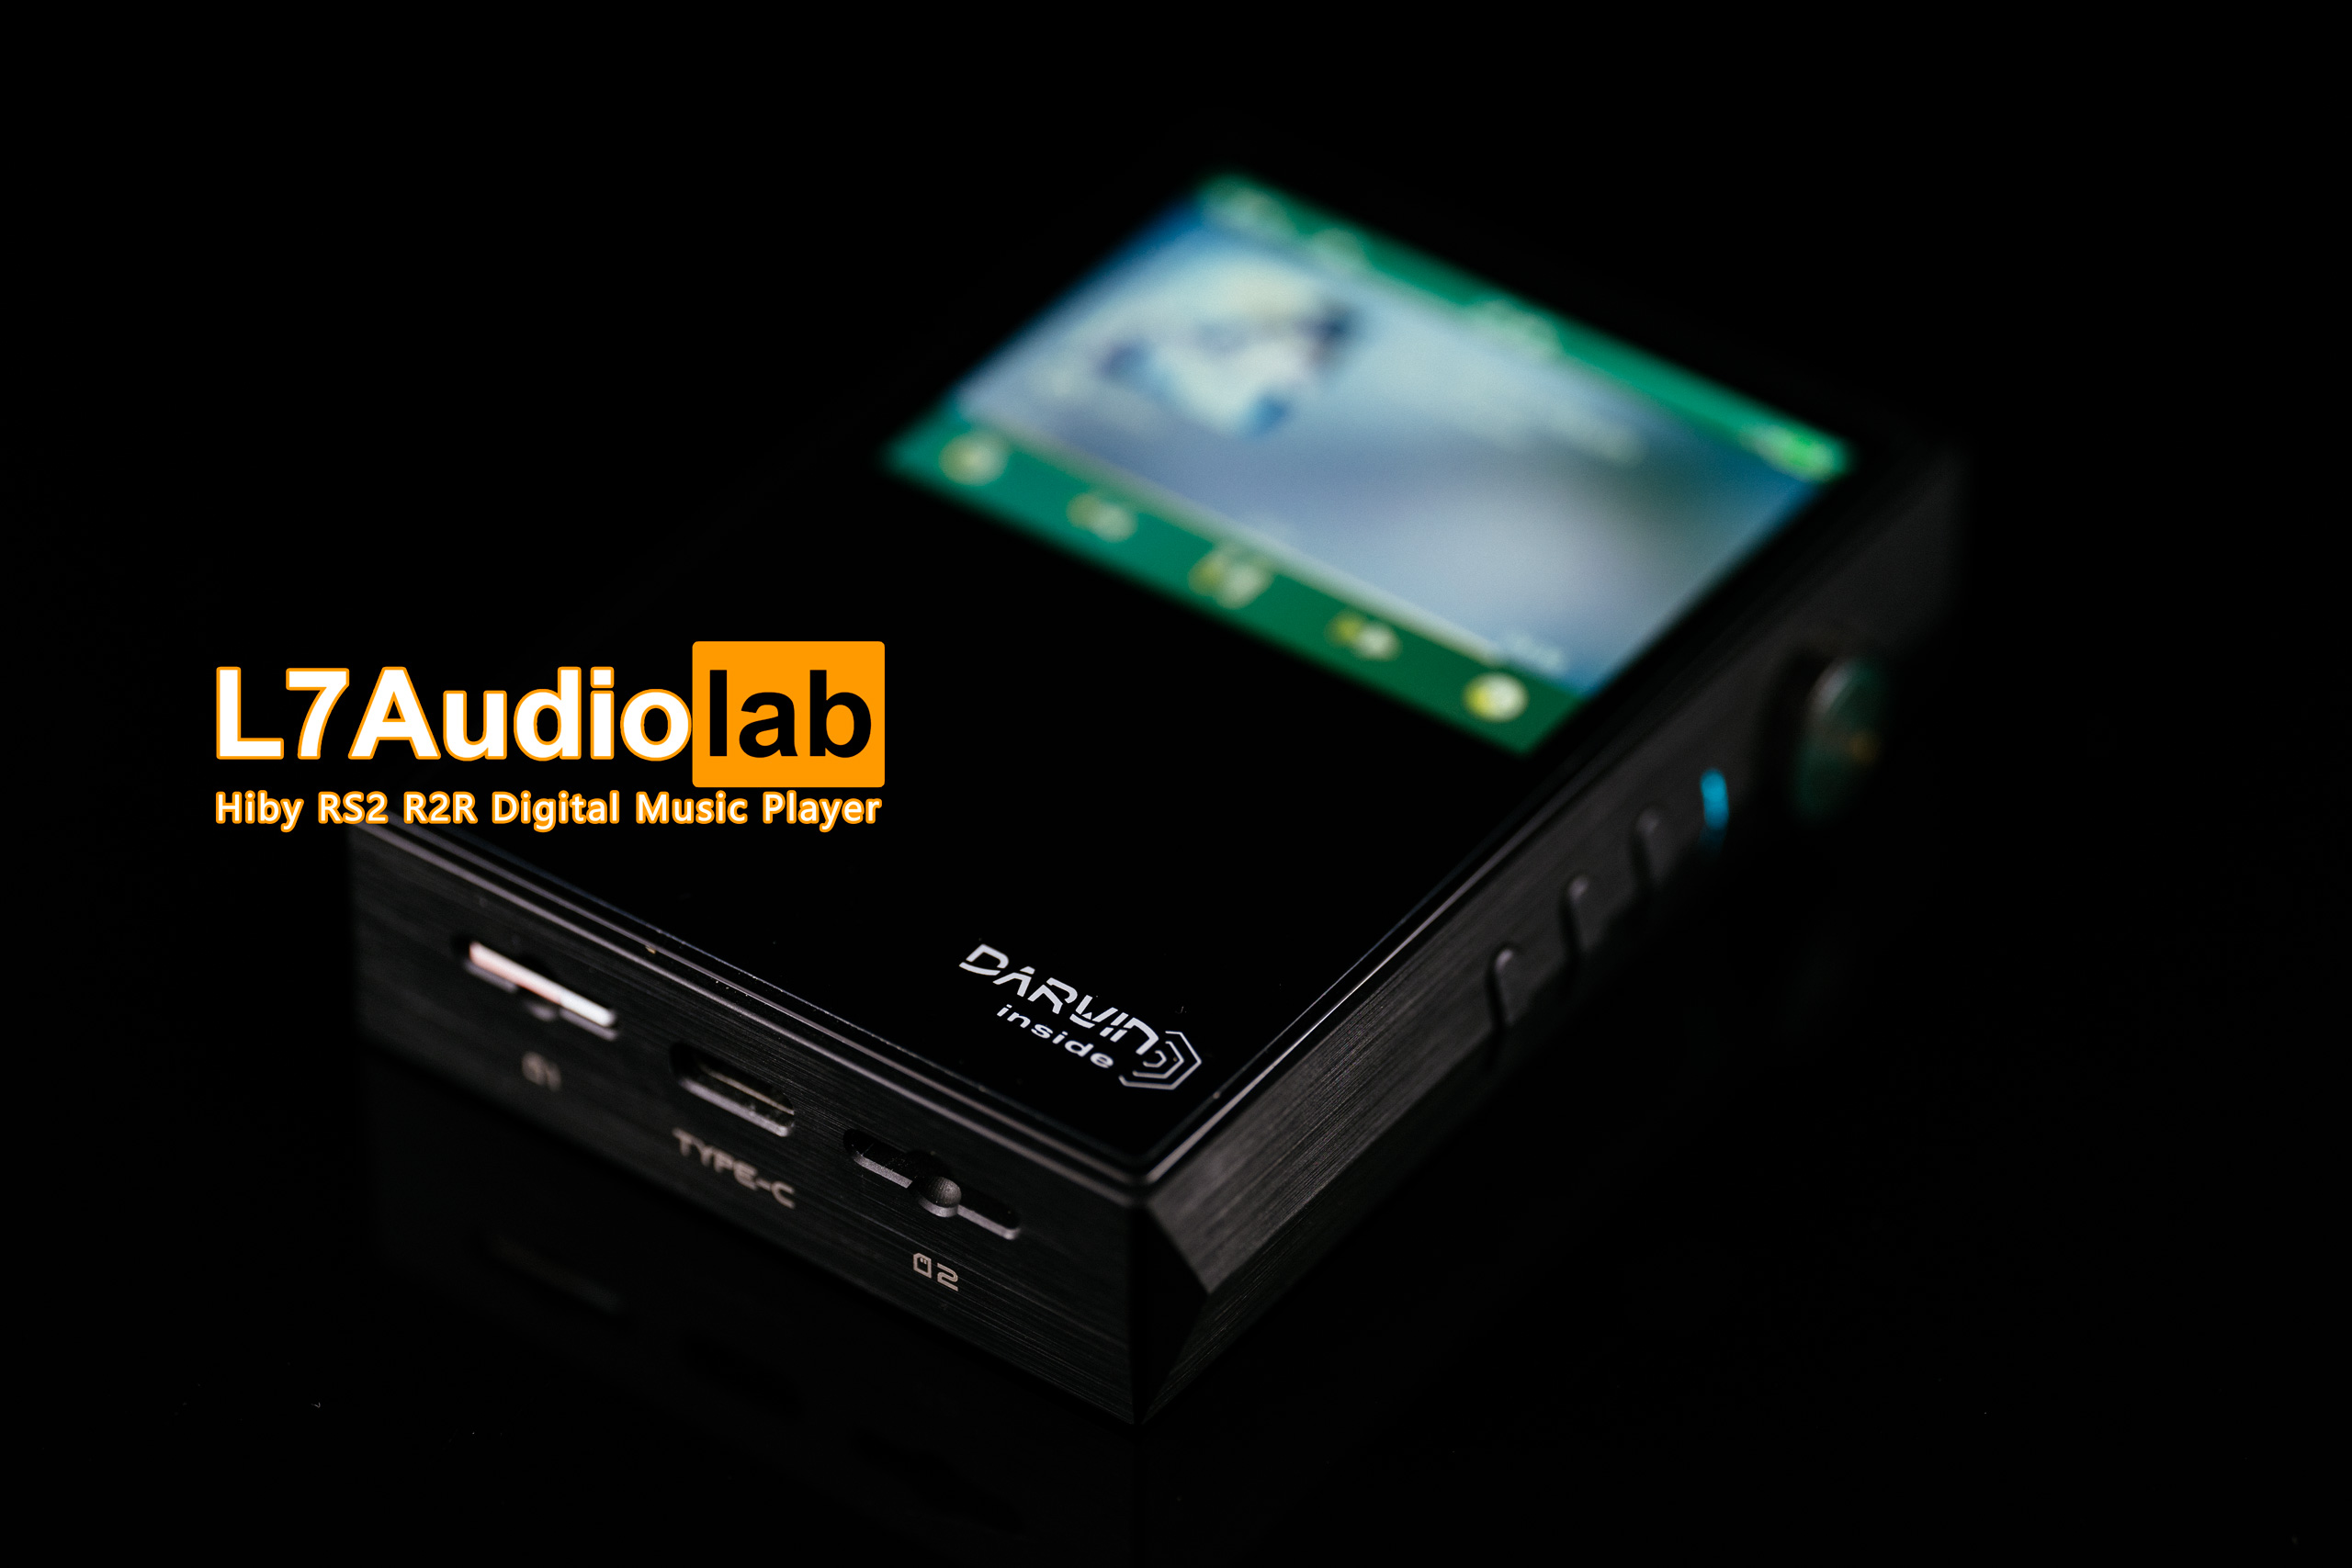 Measurements of HiBy RS2 Digital Music Player - L7Audiolab